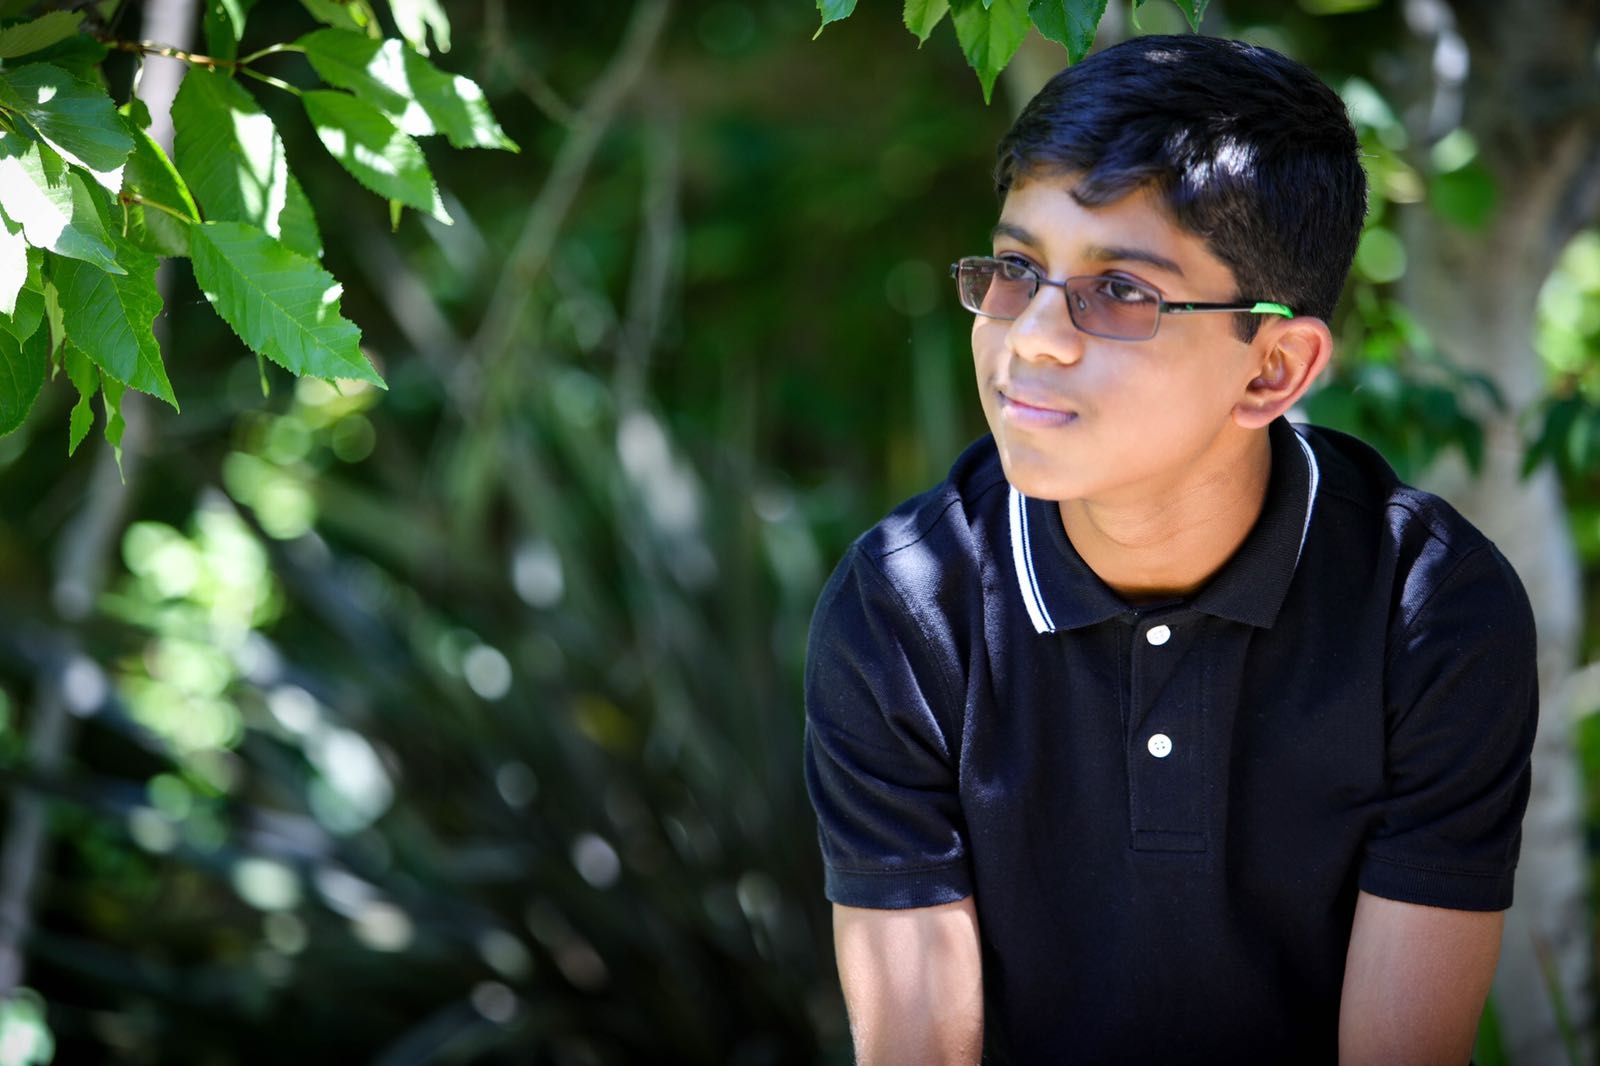 young boy sitting amonst trees wearing a dark shirt and glasses looking off into the distance